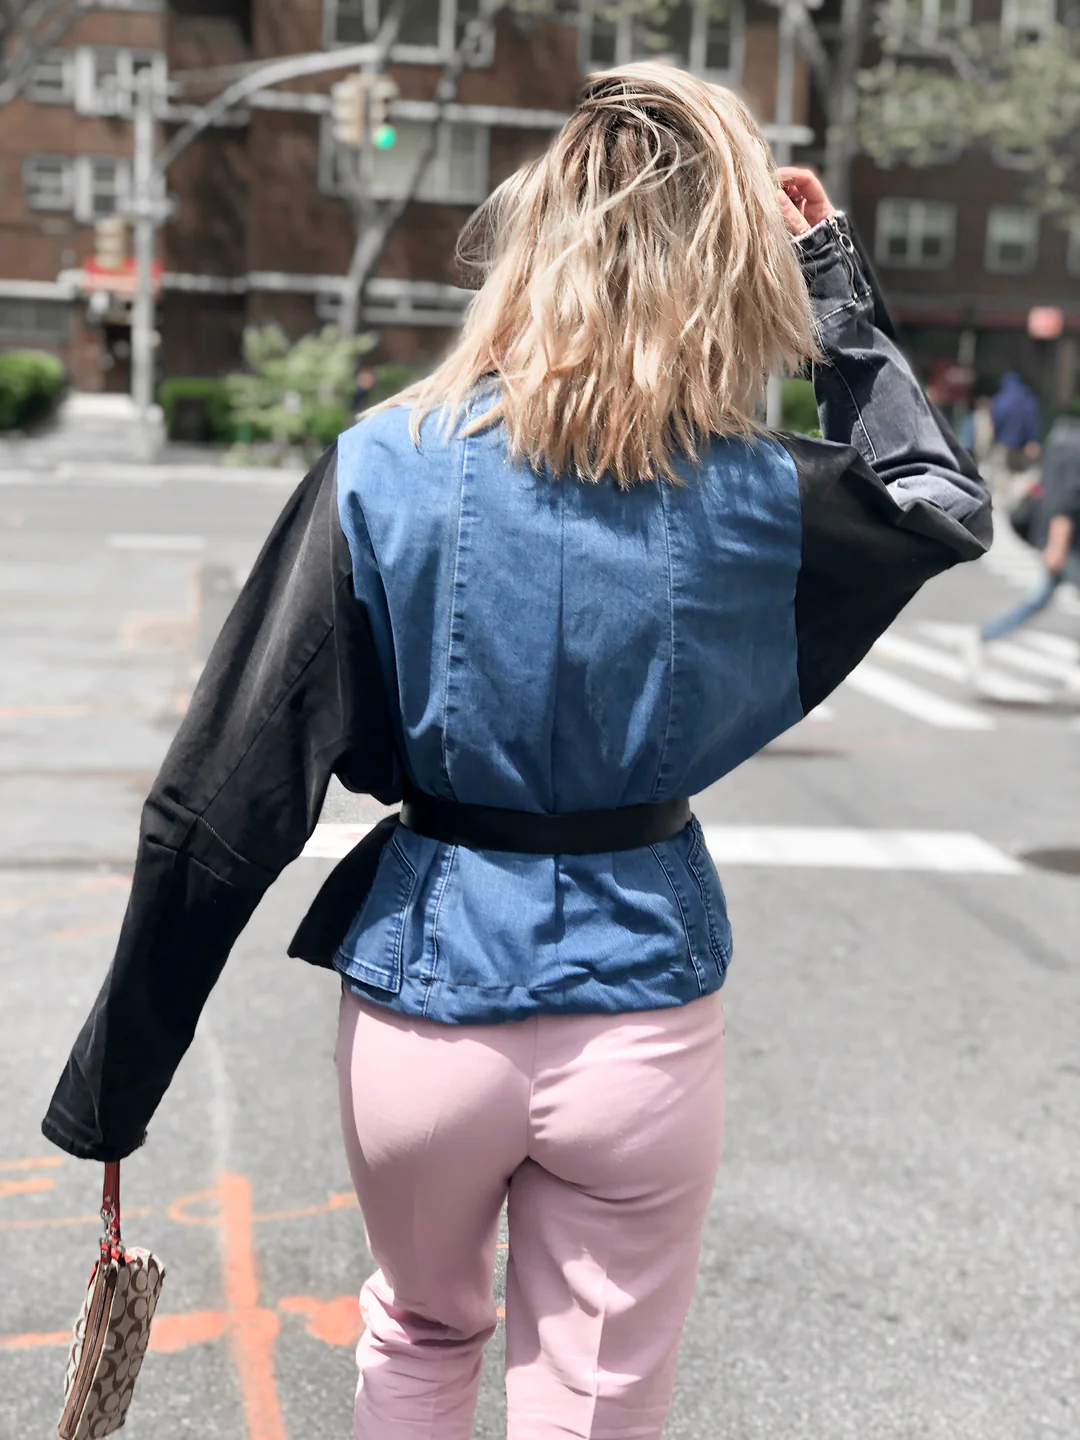 A woman walking down a street wearing an Up-Cycled Denim Jacket.